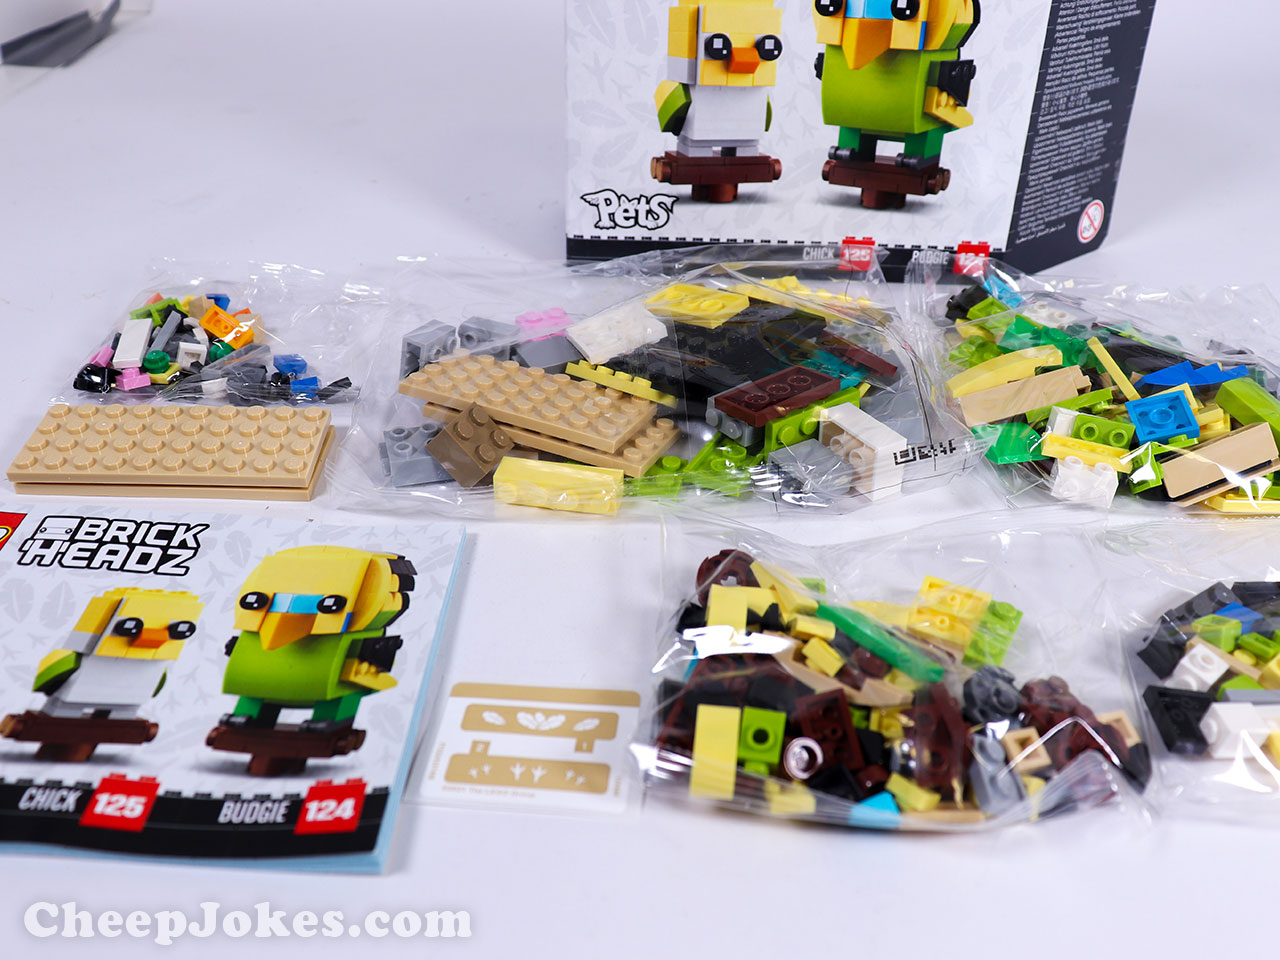 Bird fans will flock to this BrickHeadz™ Budgie (40443) build-and-display set. The budgie and chick both sit on iconic BrickHeadz stands designed to look like wooden bird perches. The stands fit into a sturdy brown base that resembles the bottom of a birdcage and comes with 2 stickers – 1 with feathers, 1 with footprints – for decorating the base. This buildable pet set is a perfect gift for all kids, BrickHeadz collectors and anyone who loves birds.